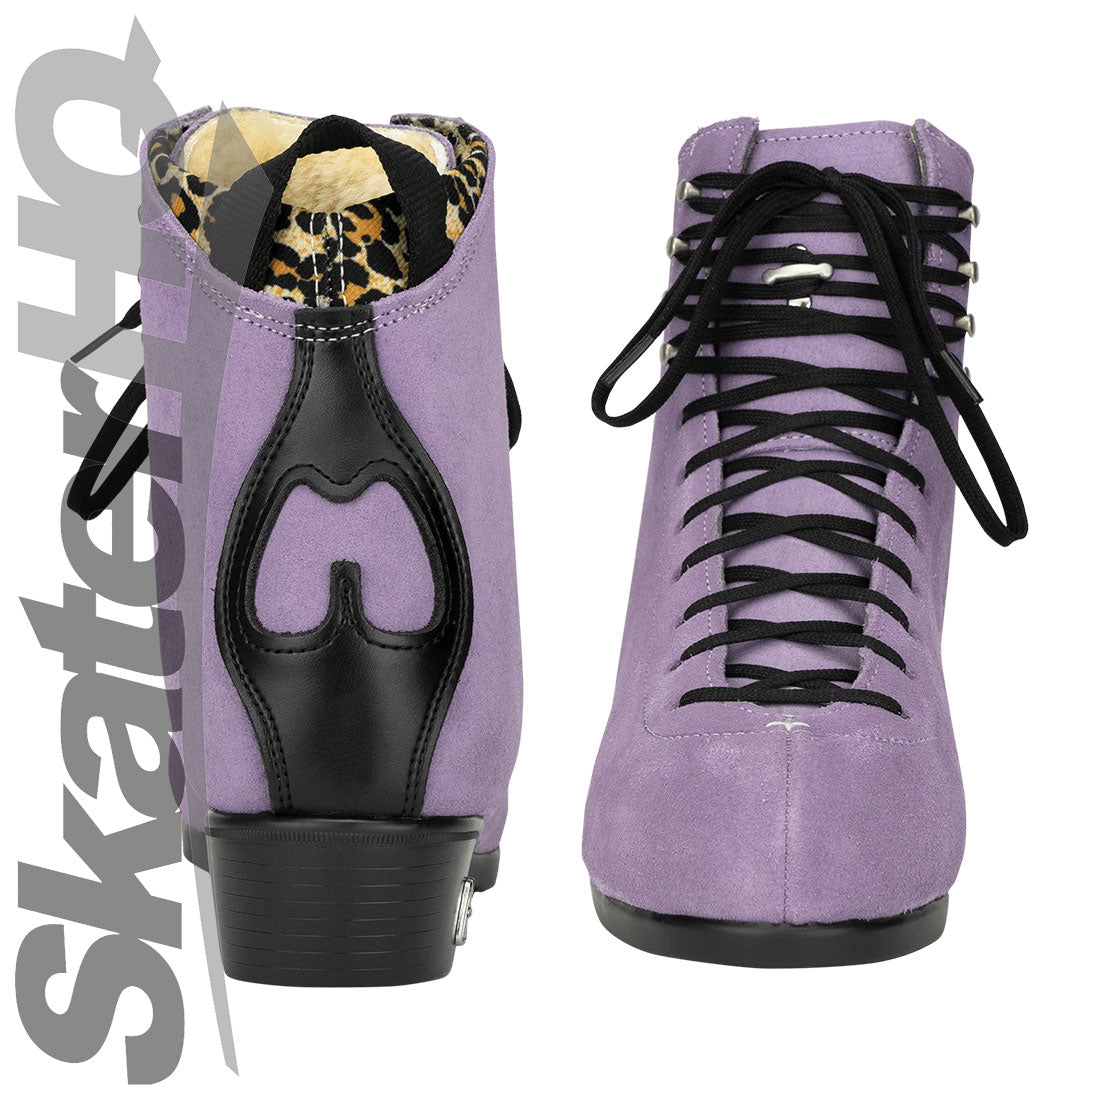 Moxi Jack 2 Boot - Lilac Roller Skate Boots